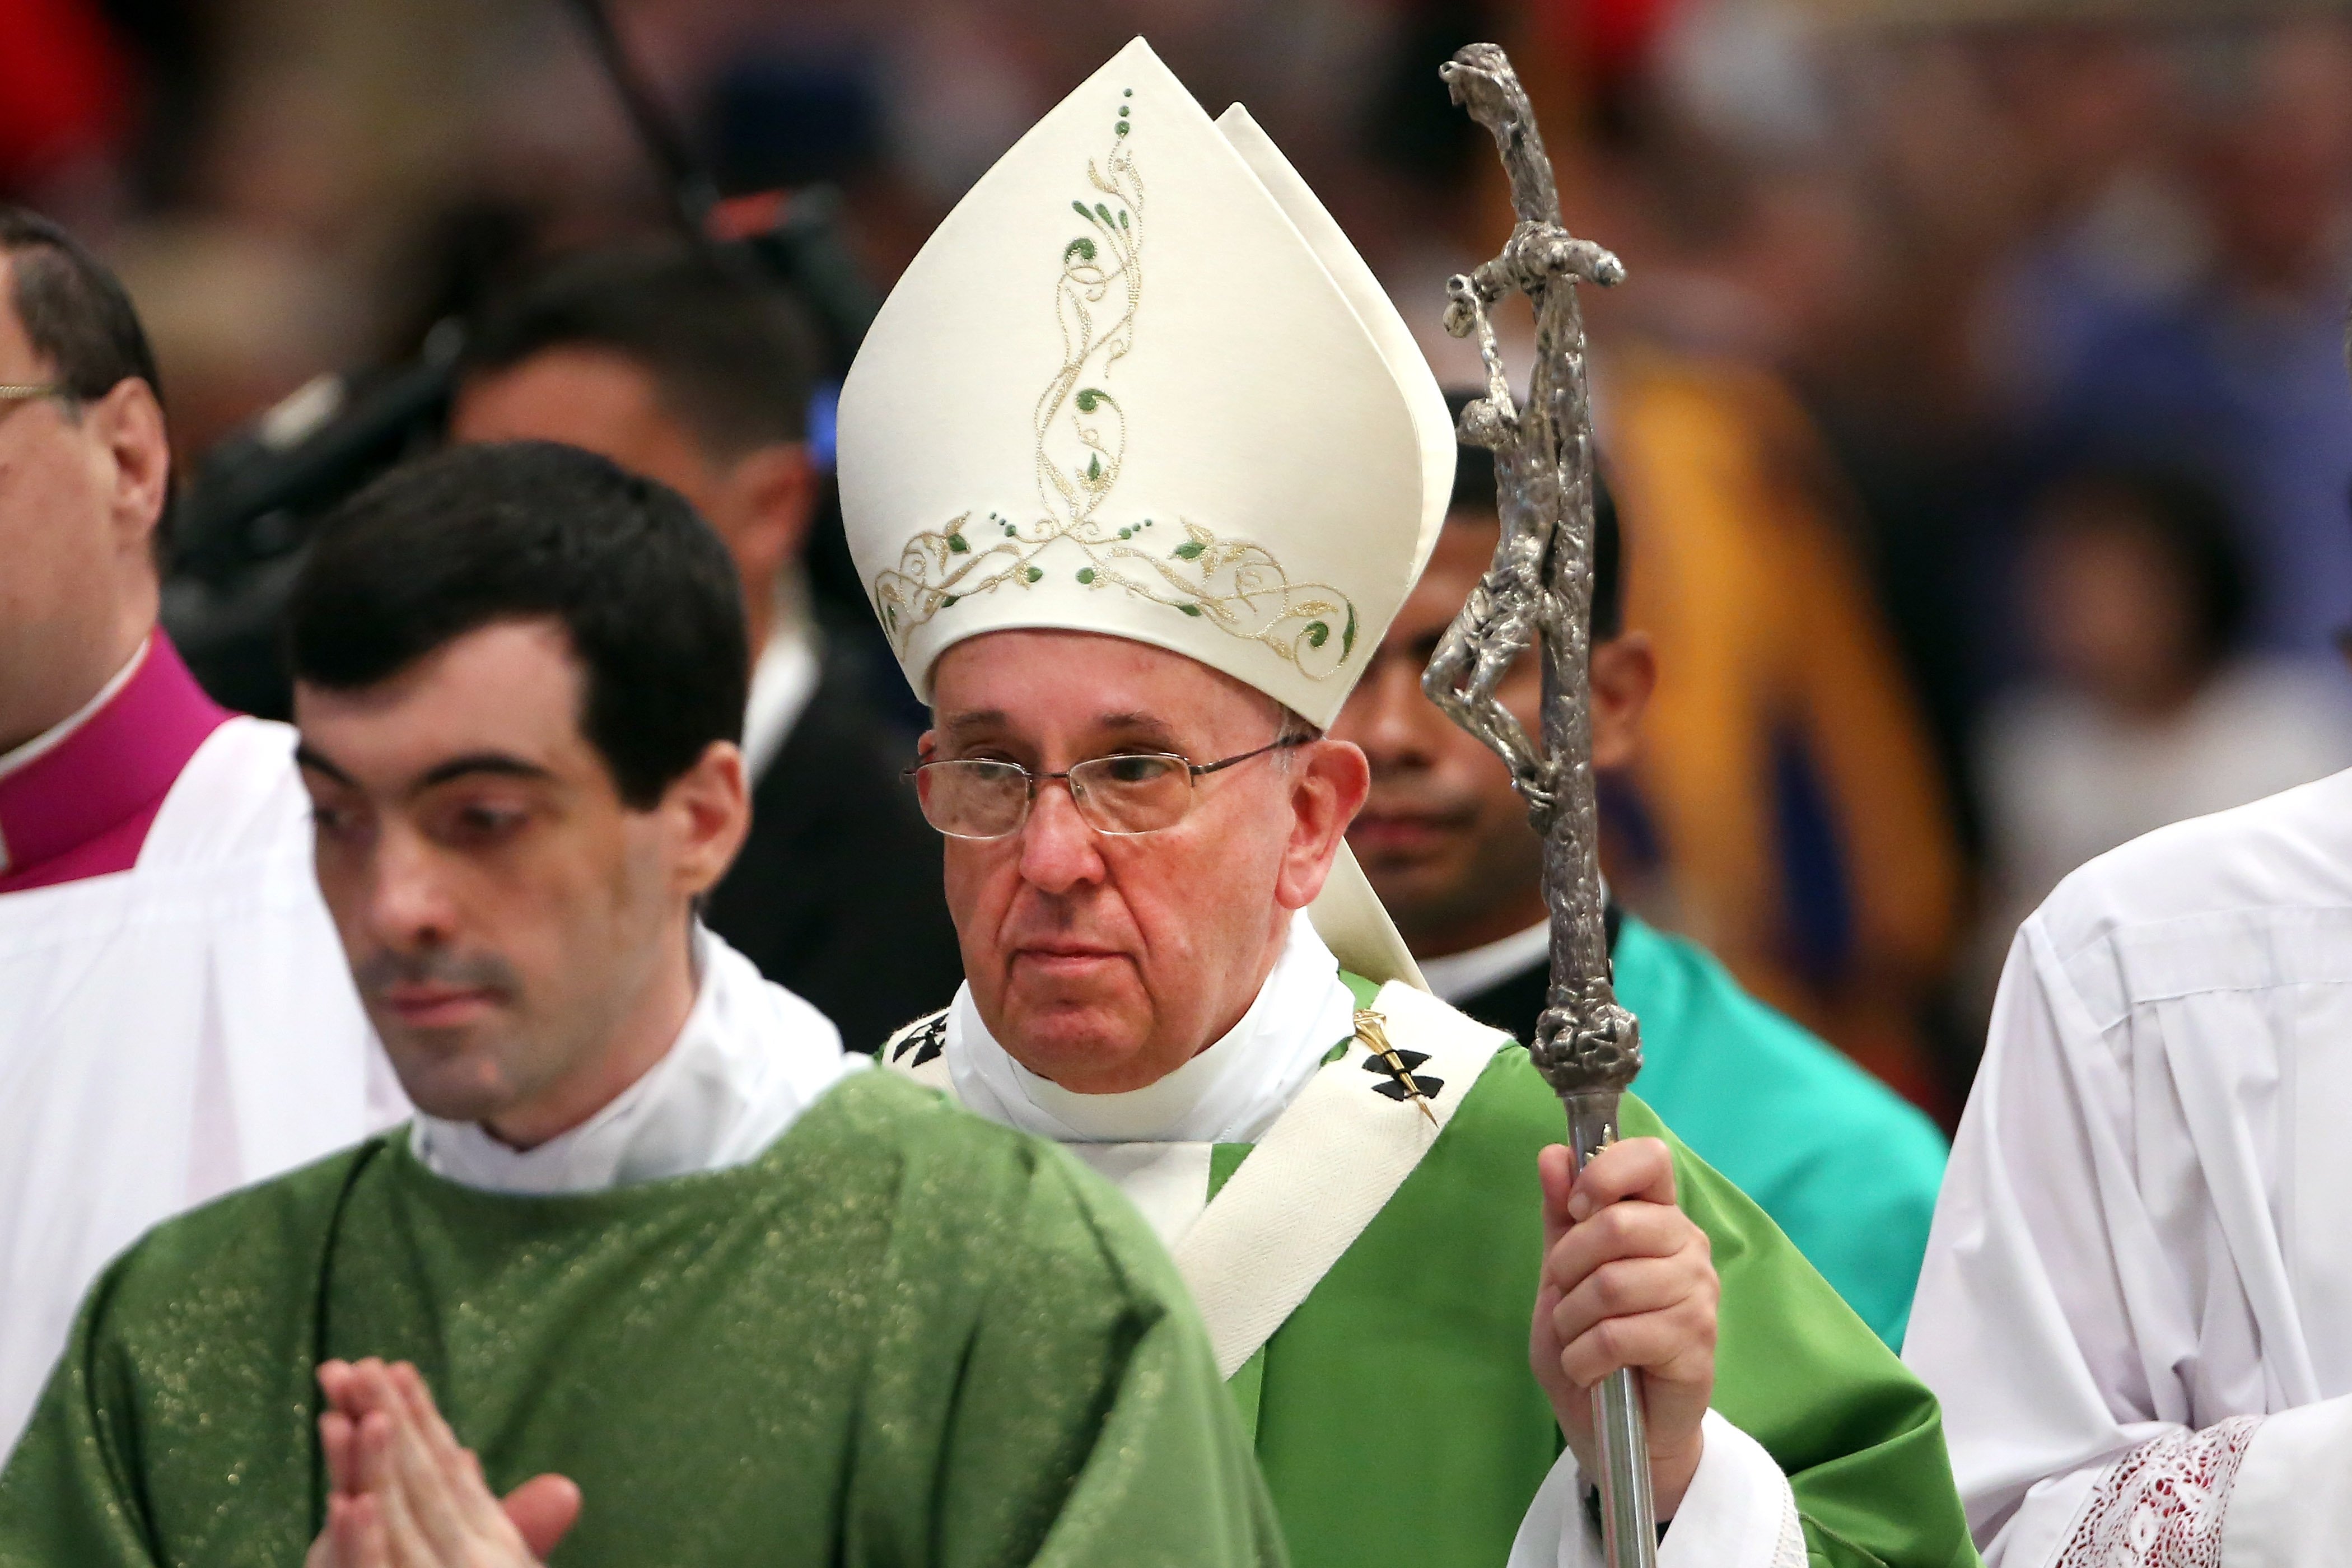 Pope Attends Holy Mass For The Opening Of The Extraordinary Synod On The Family